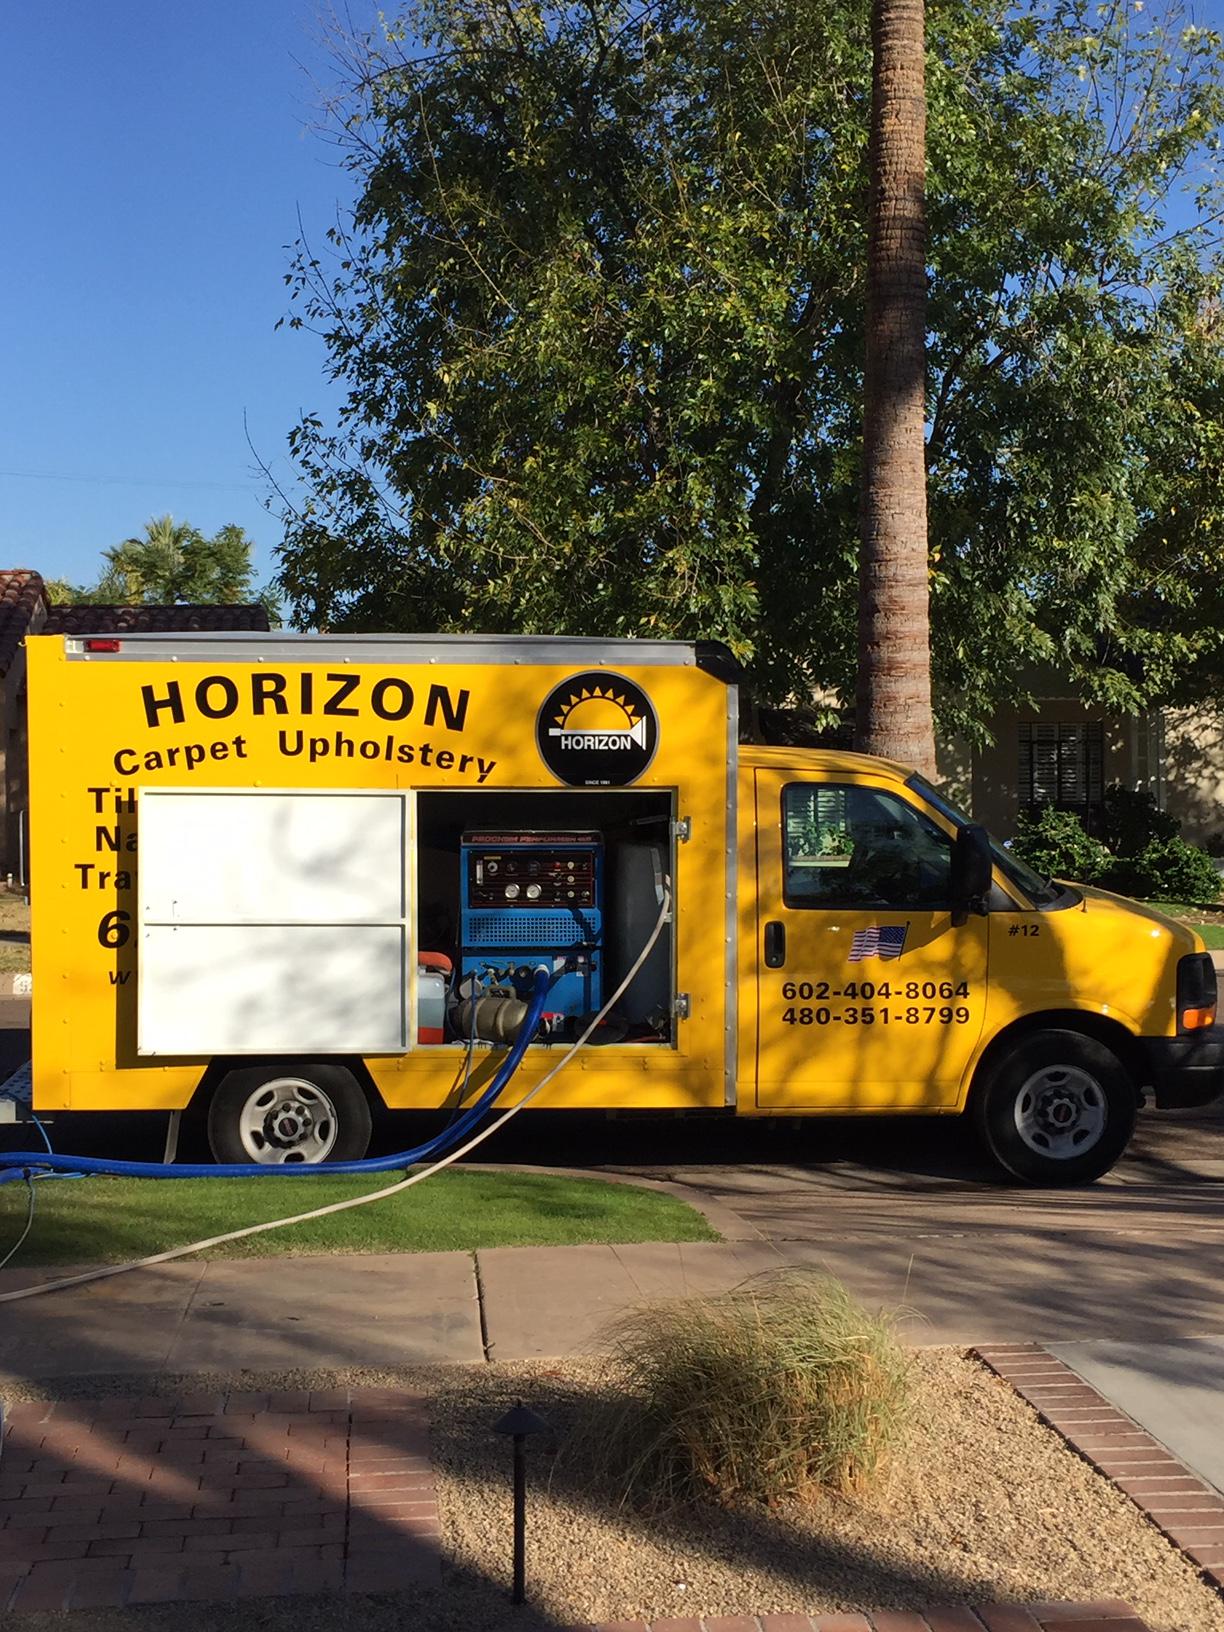 Horizon Carpet, Upholstery, Tile & Grout Cleaners & Repair Photo